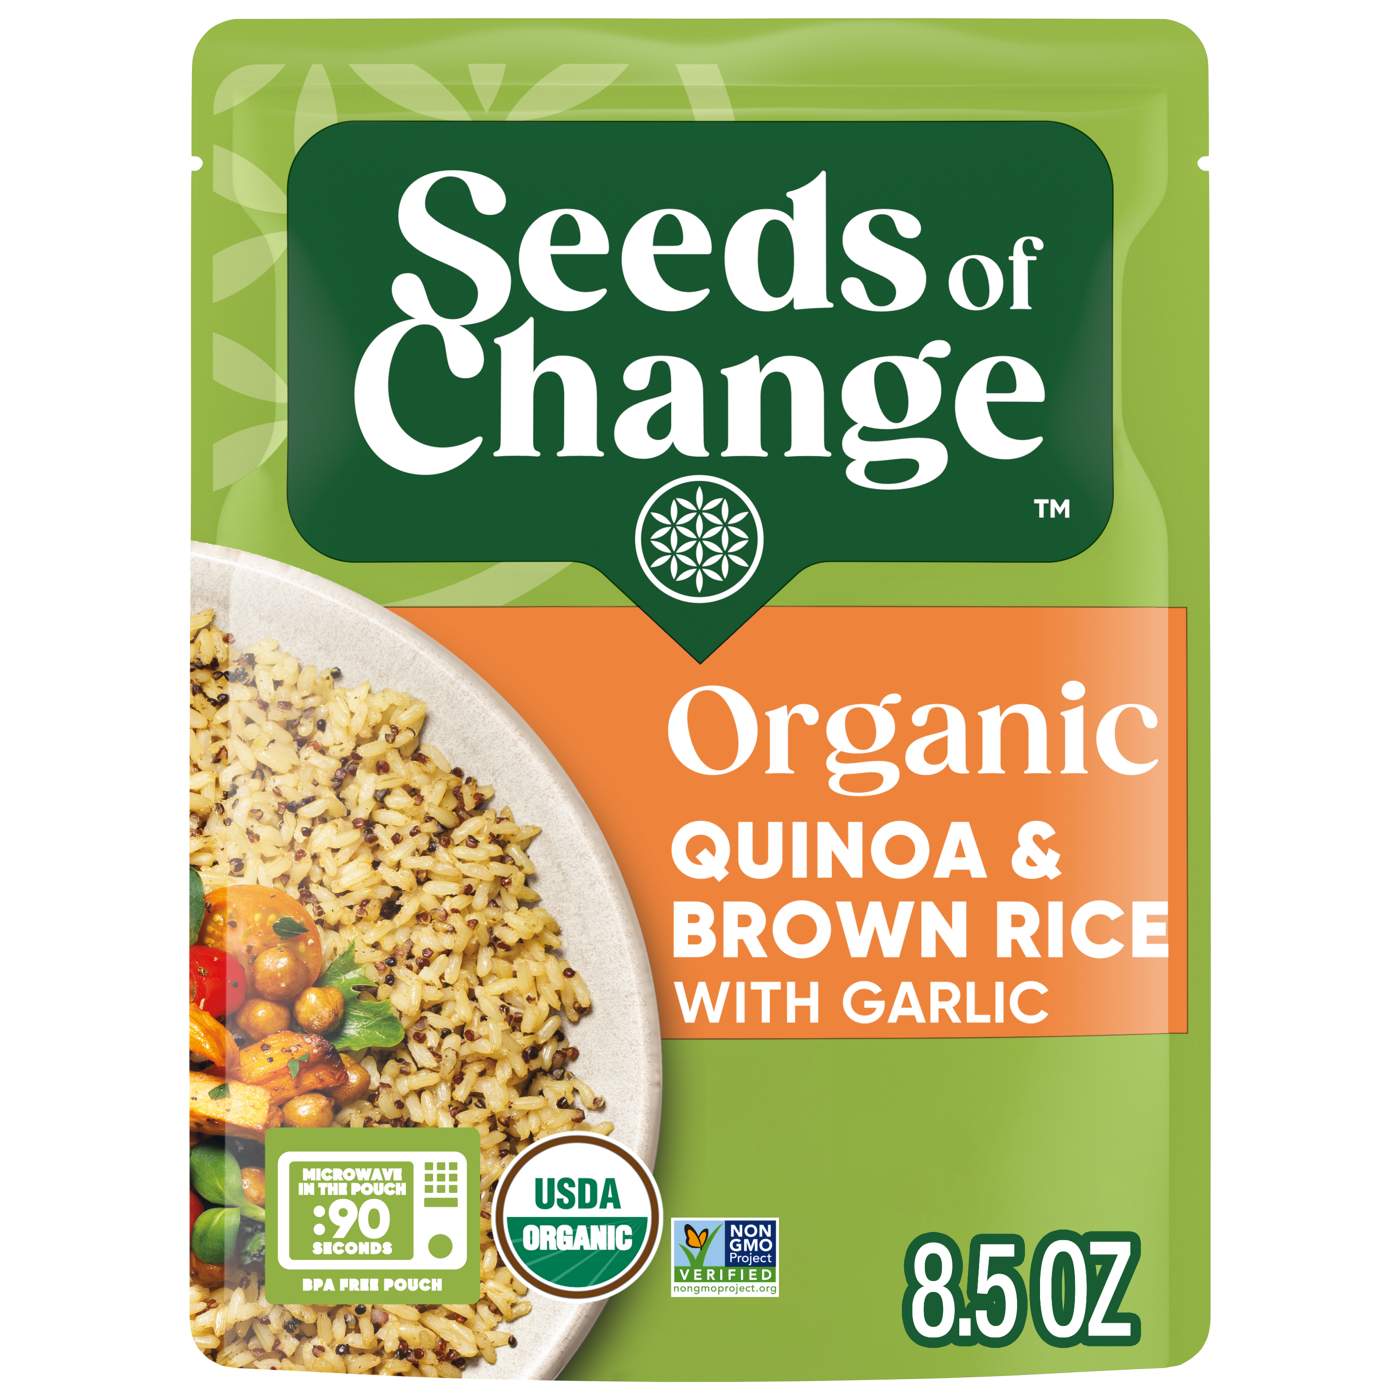 Seeds of Change Organic Quinoa & Brown Rice with Garlic; image 1 of 9